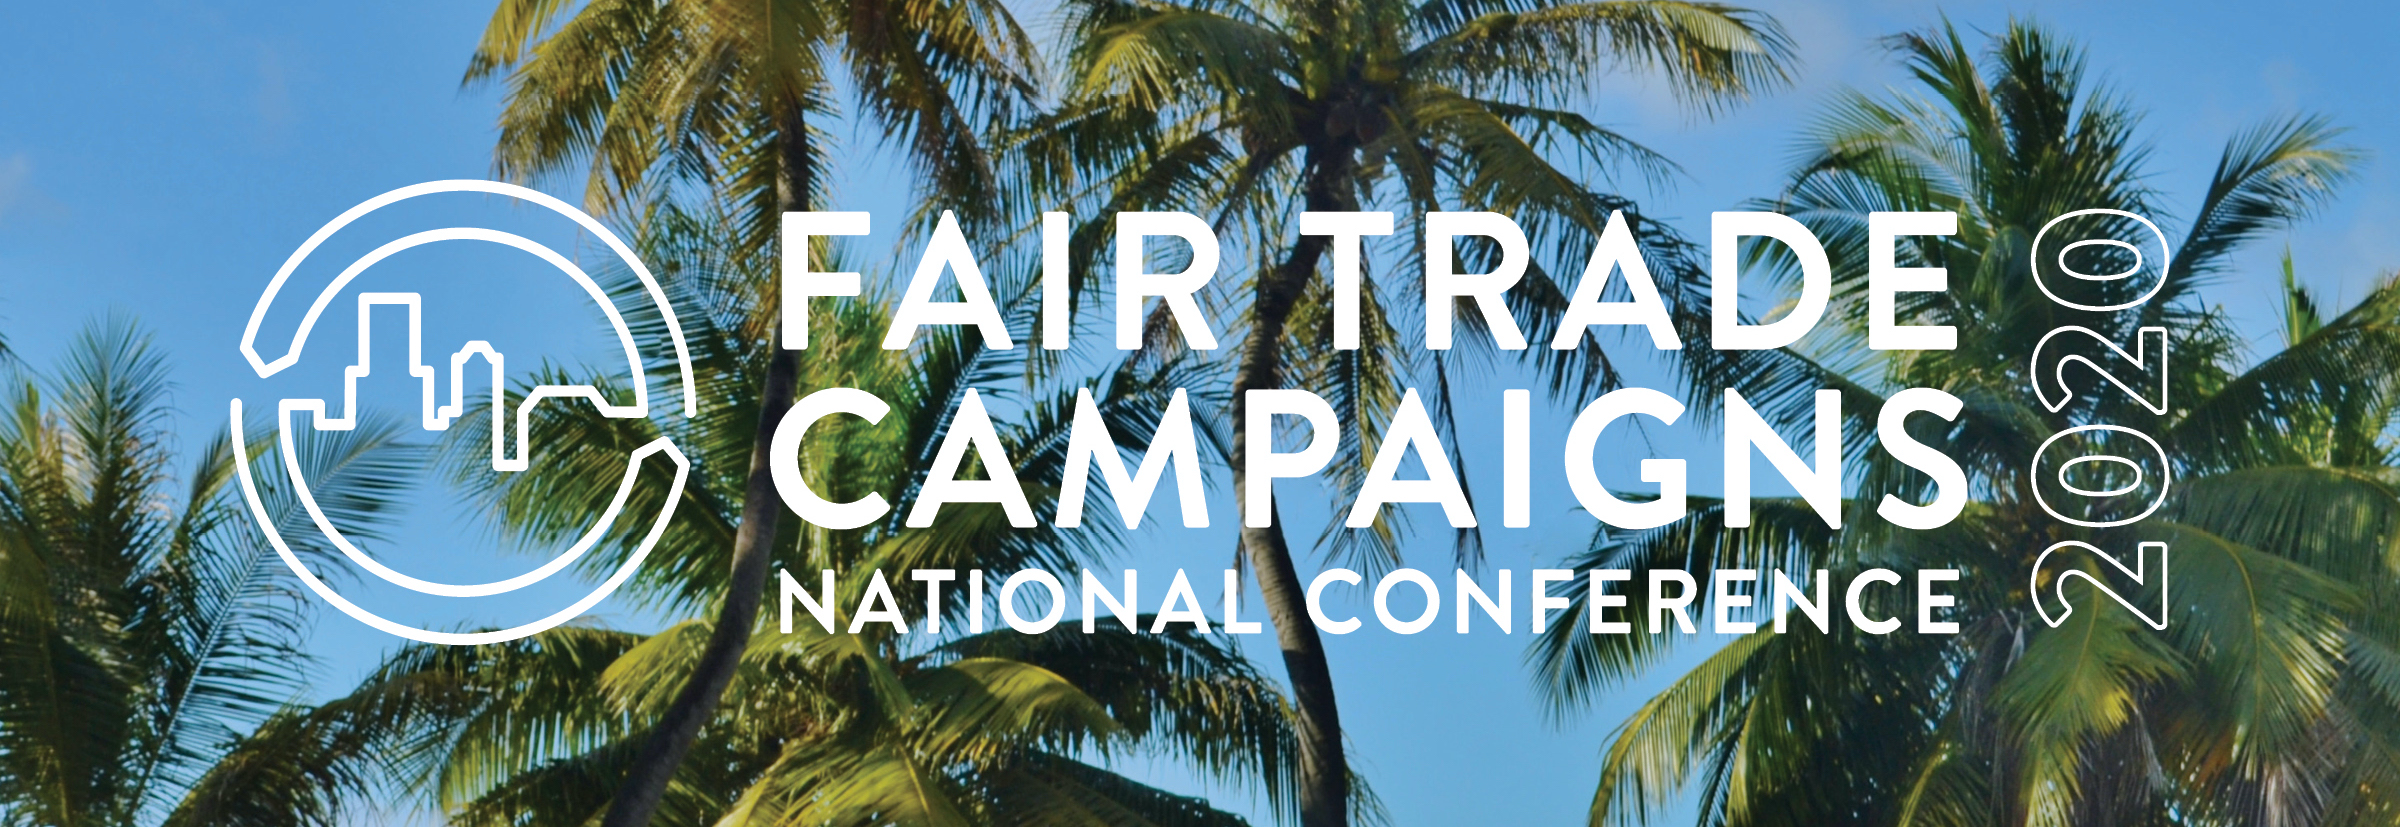 Fair Trade Campaigns 2020 National Conference